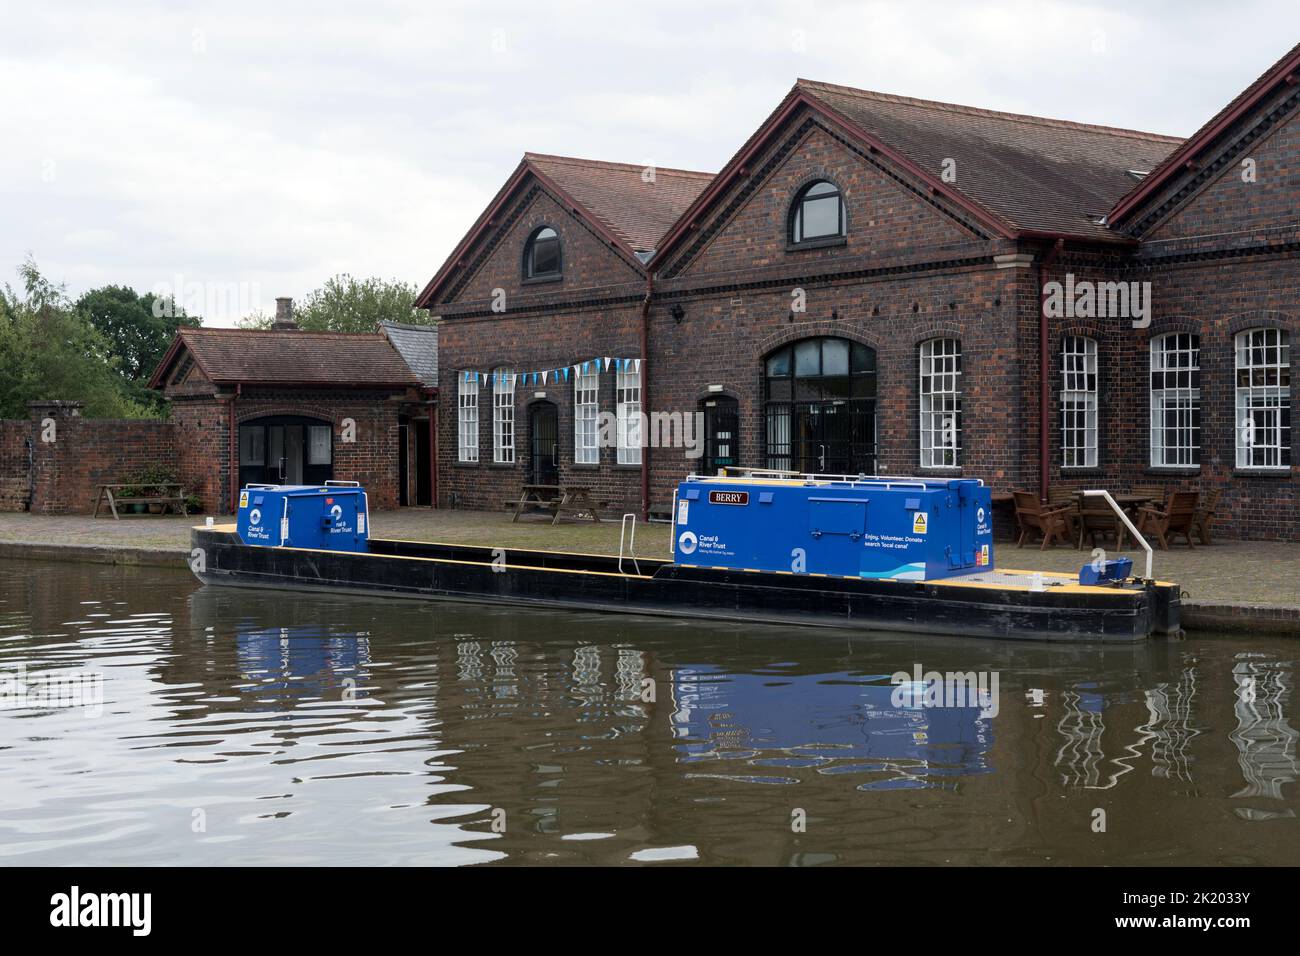 Canal and River Trust, Hatton Locks, Grand Union Canal, Warwickshire, UK Stock Photo